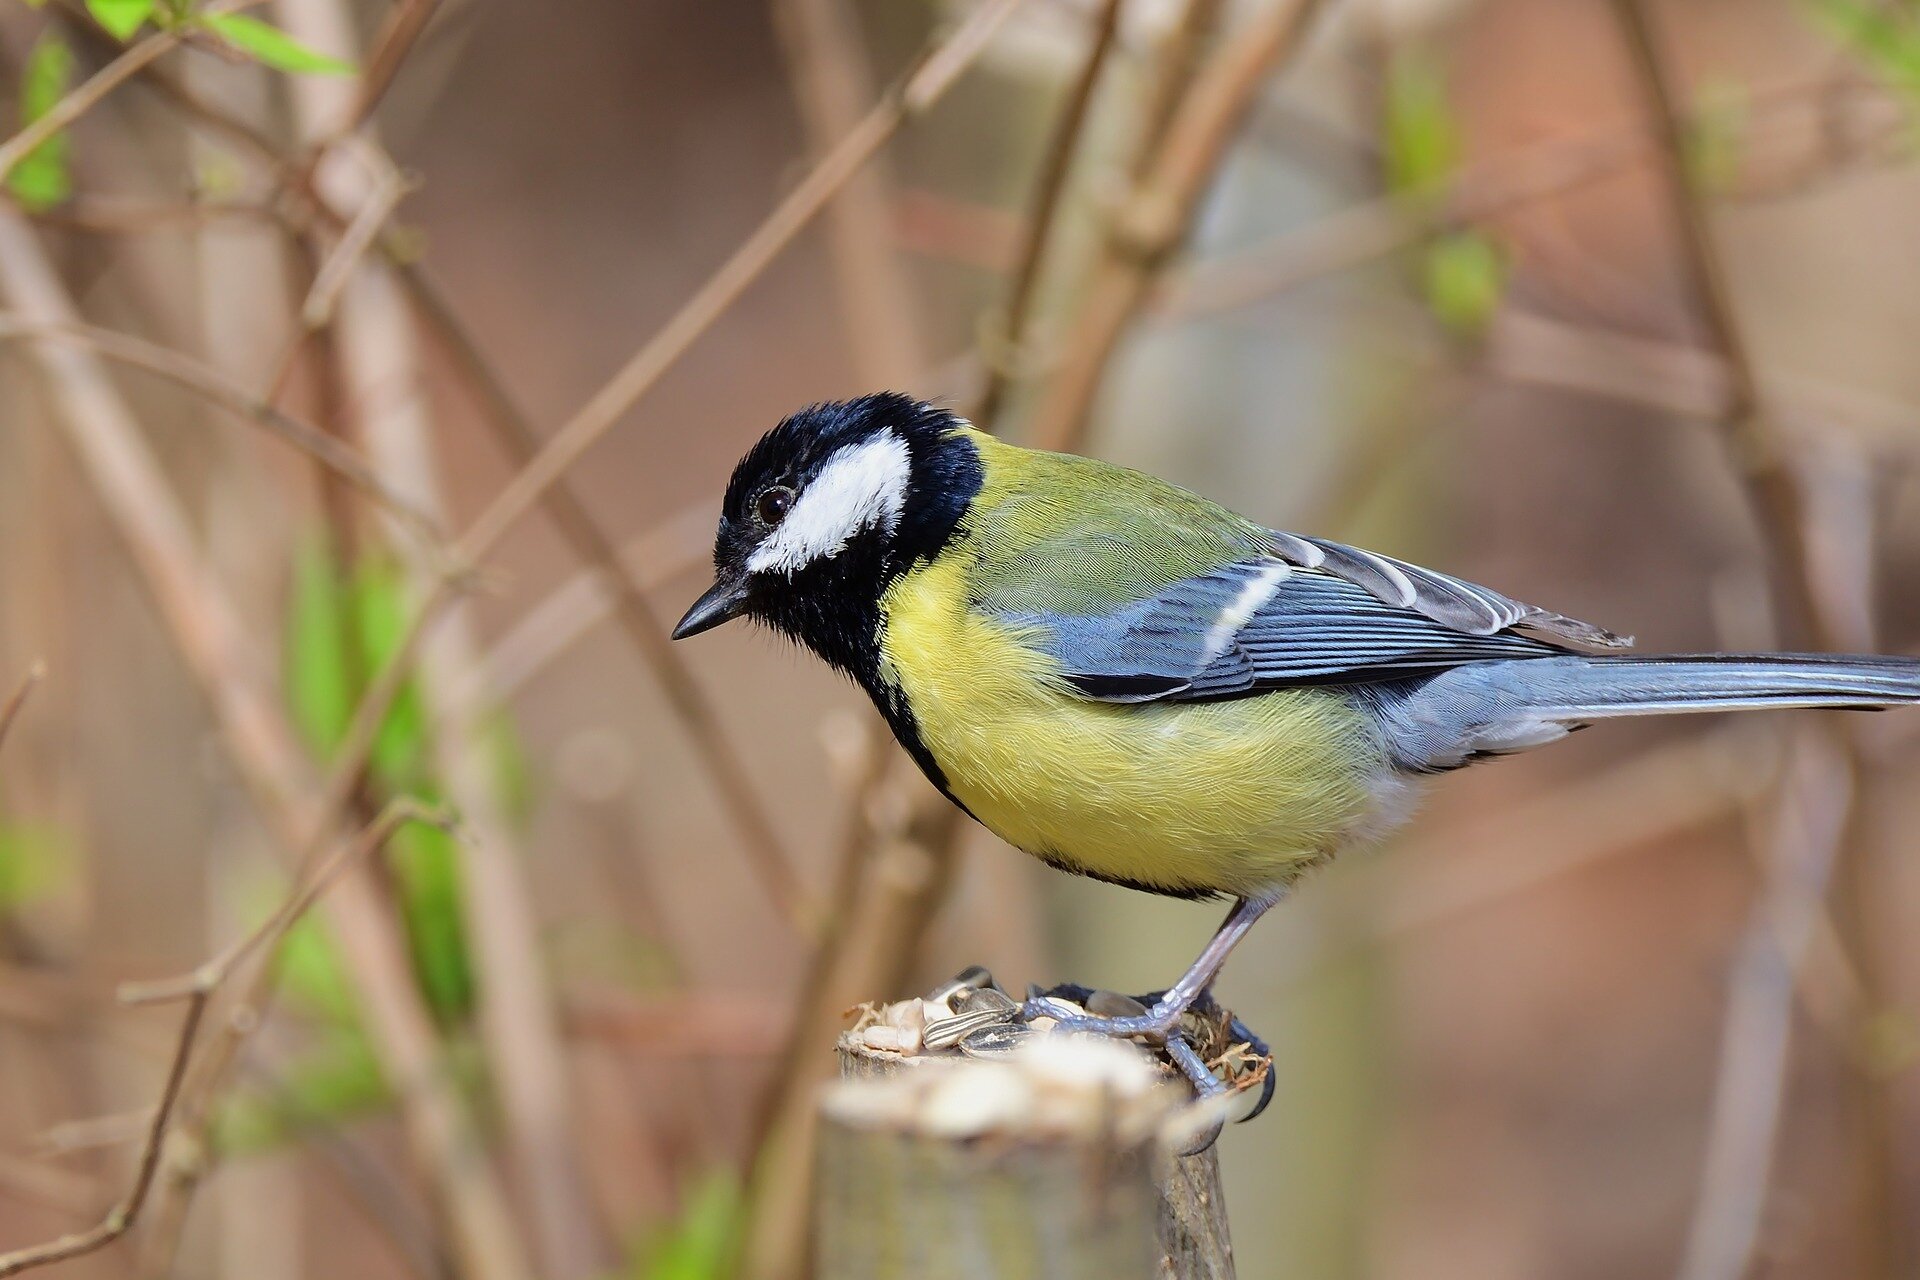 The great tits in this Oxford wood are adapting their breeding times as climate changes